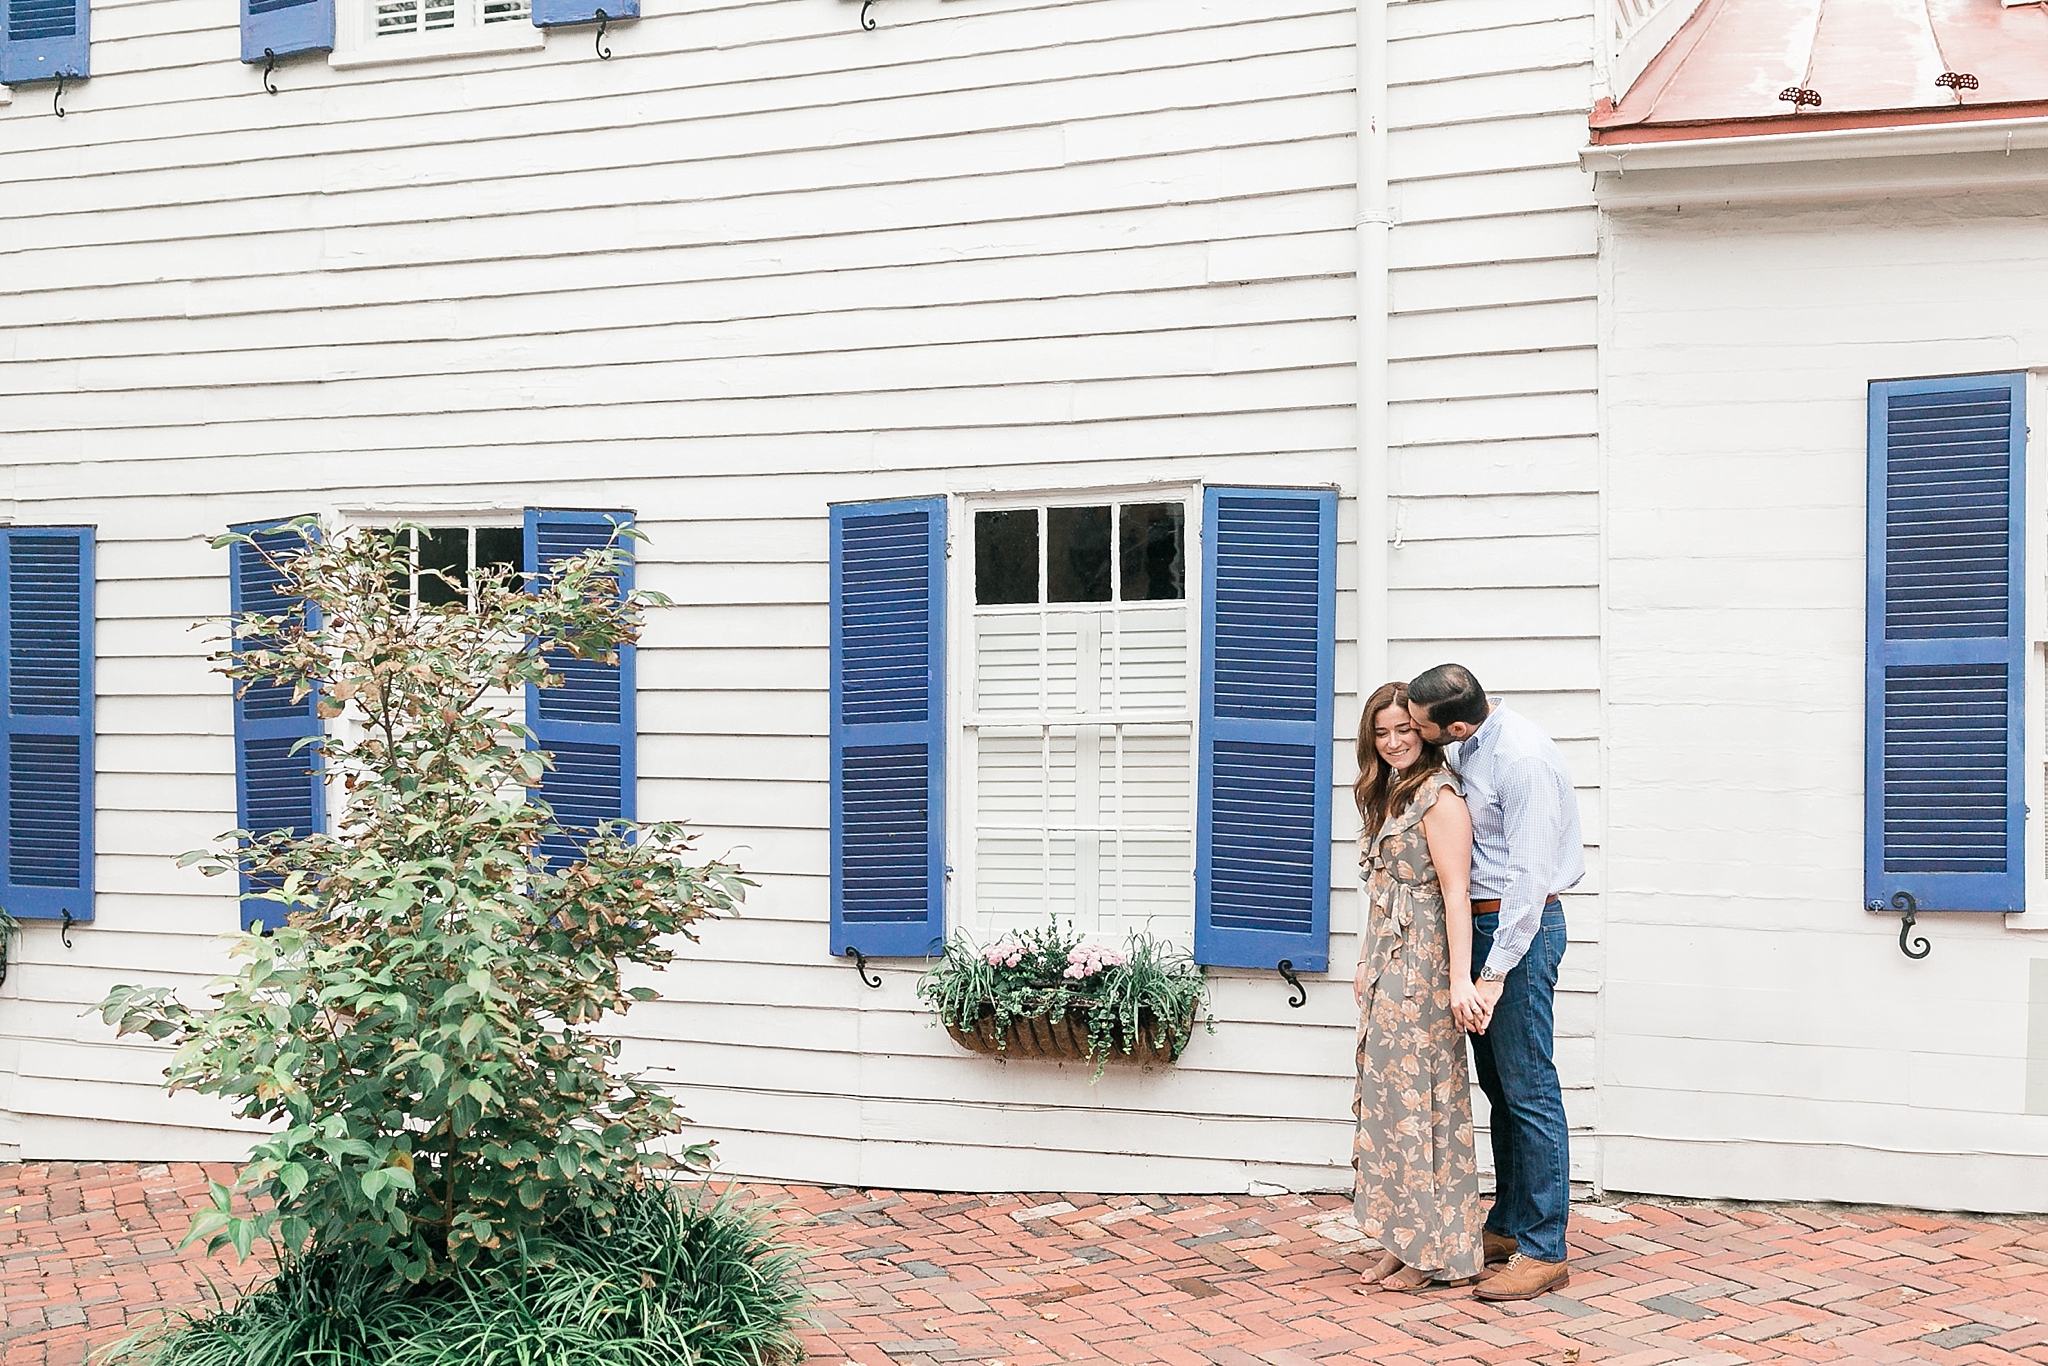 This set of timeless engagement photos were taken in Old Town Alexandria, VA by DC wedding photographer, Alicia Lacey.